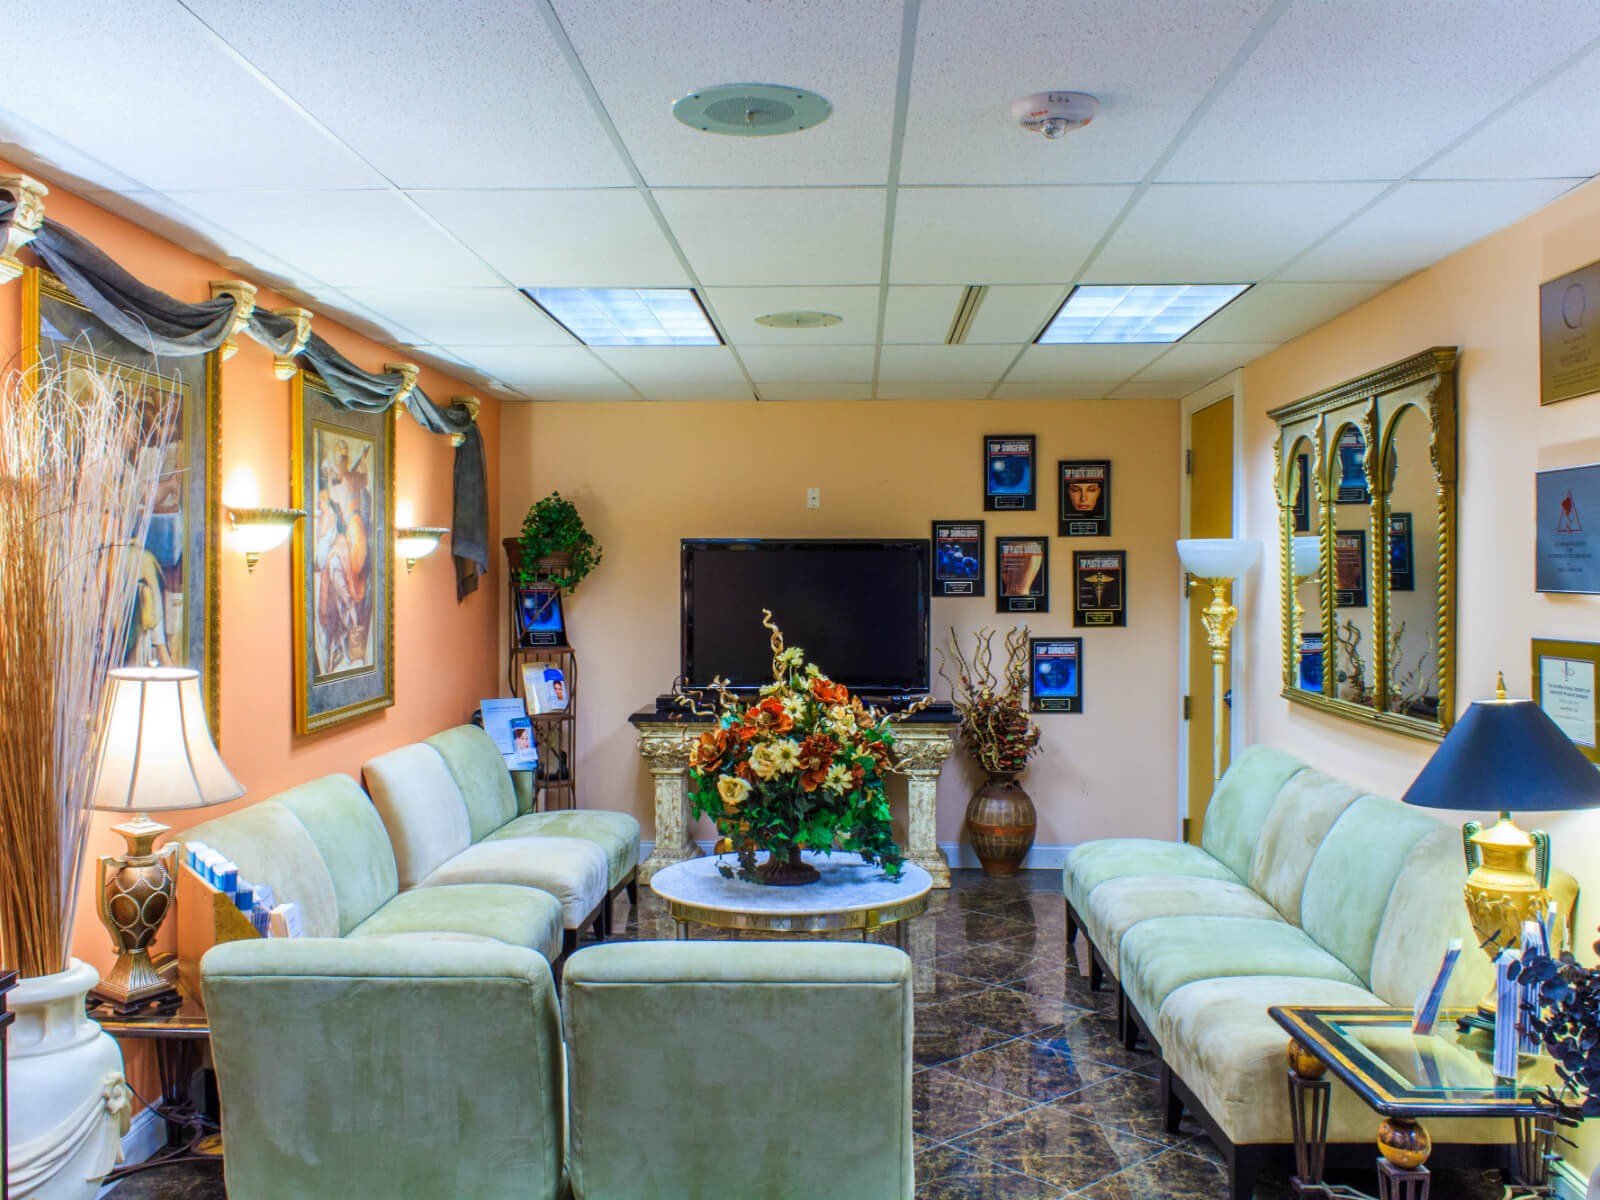 Sewickley, PA Plastic Surgery Office